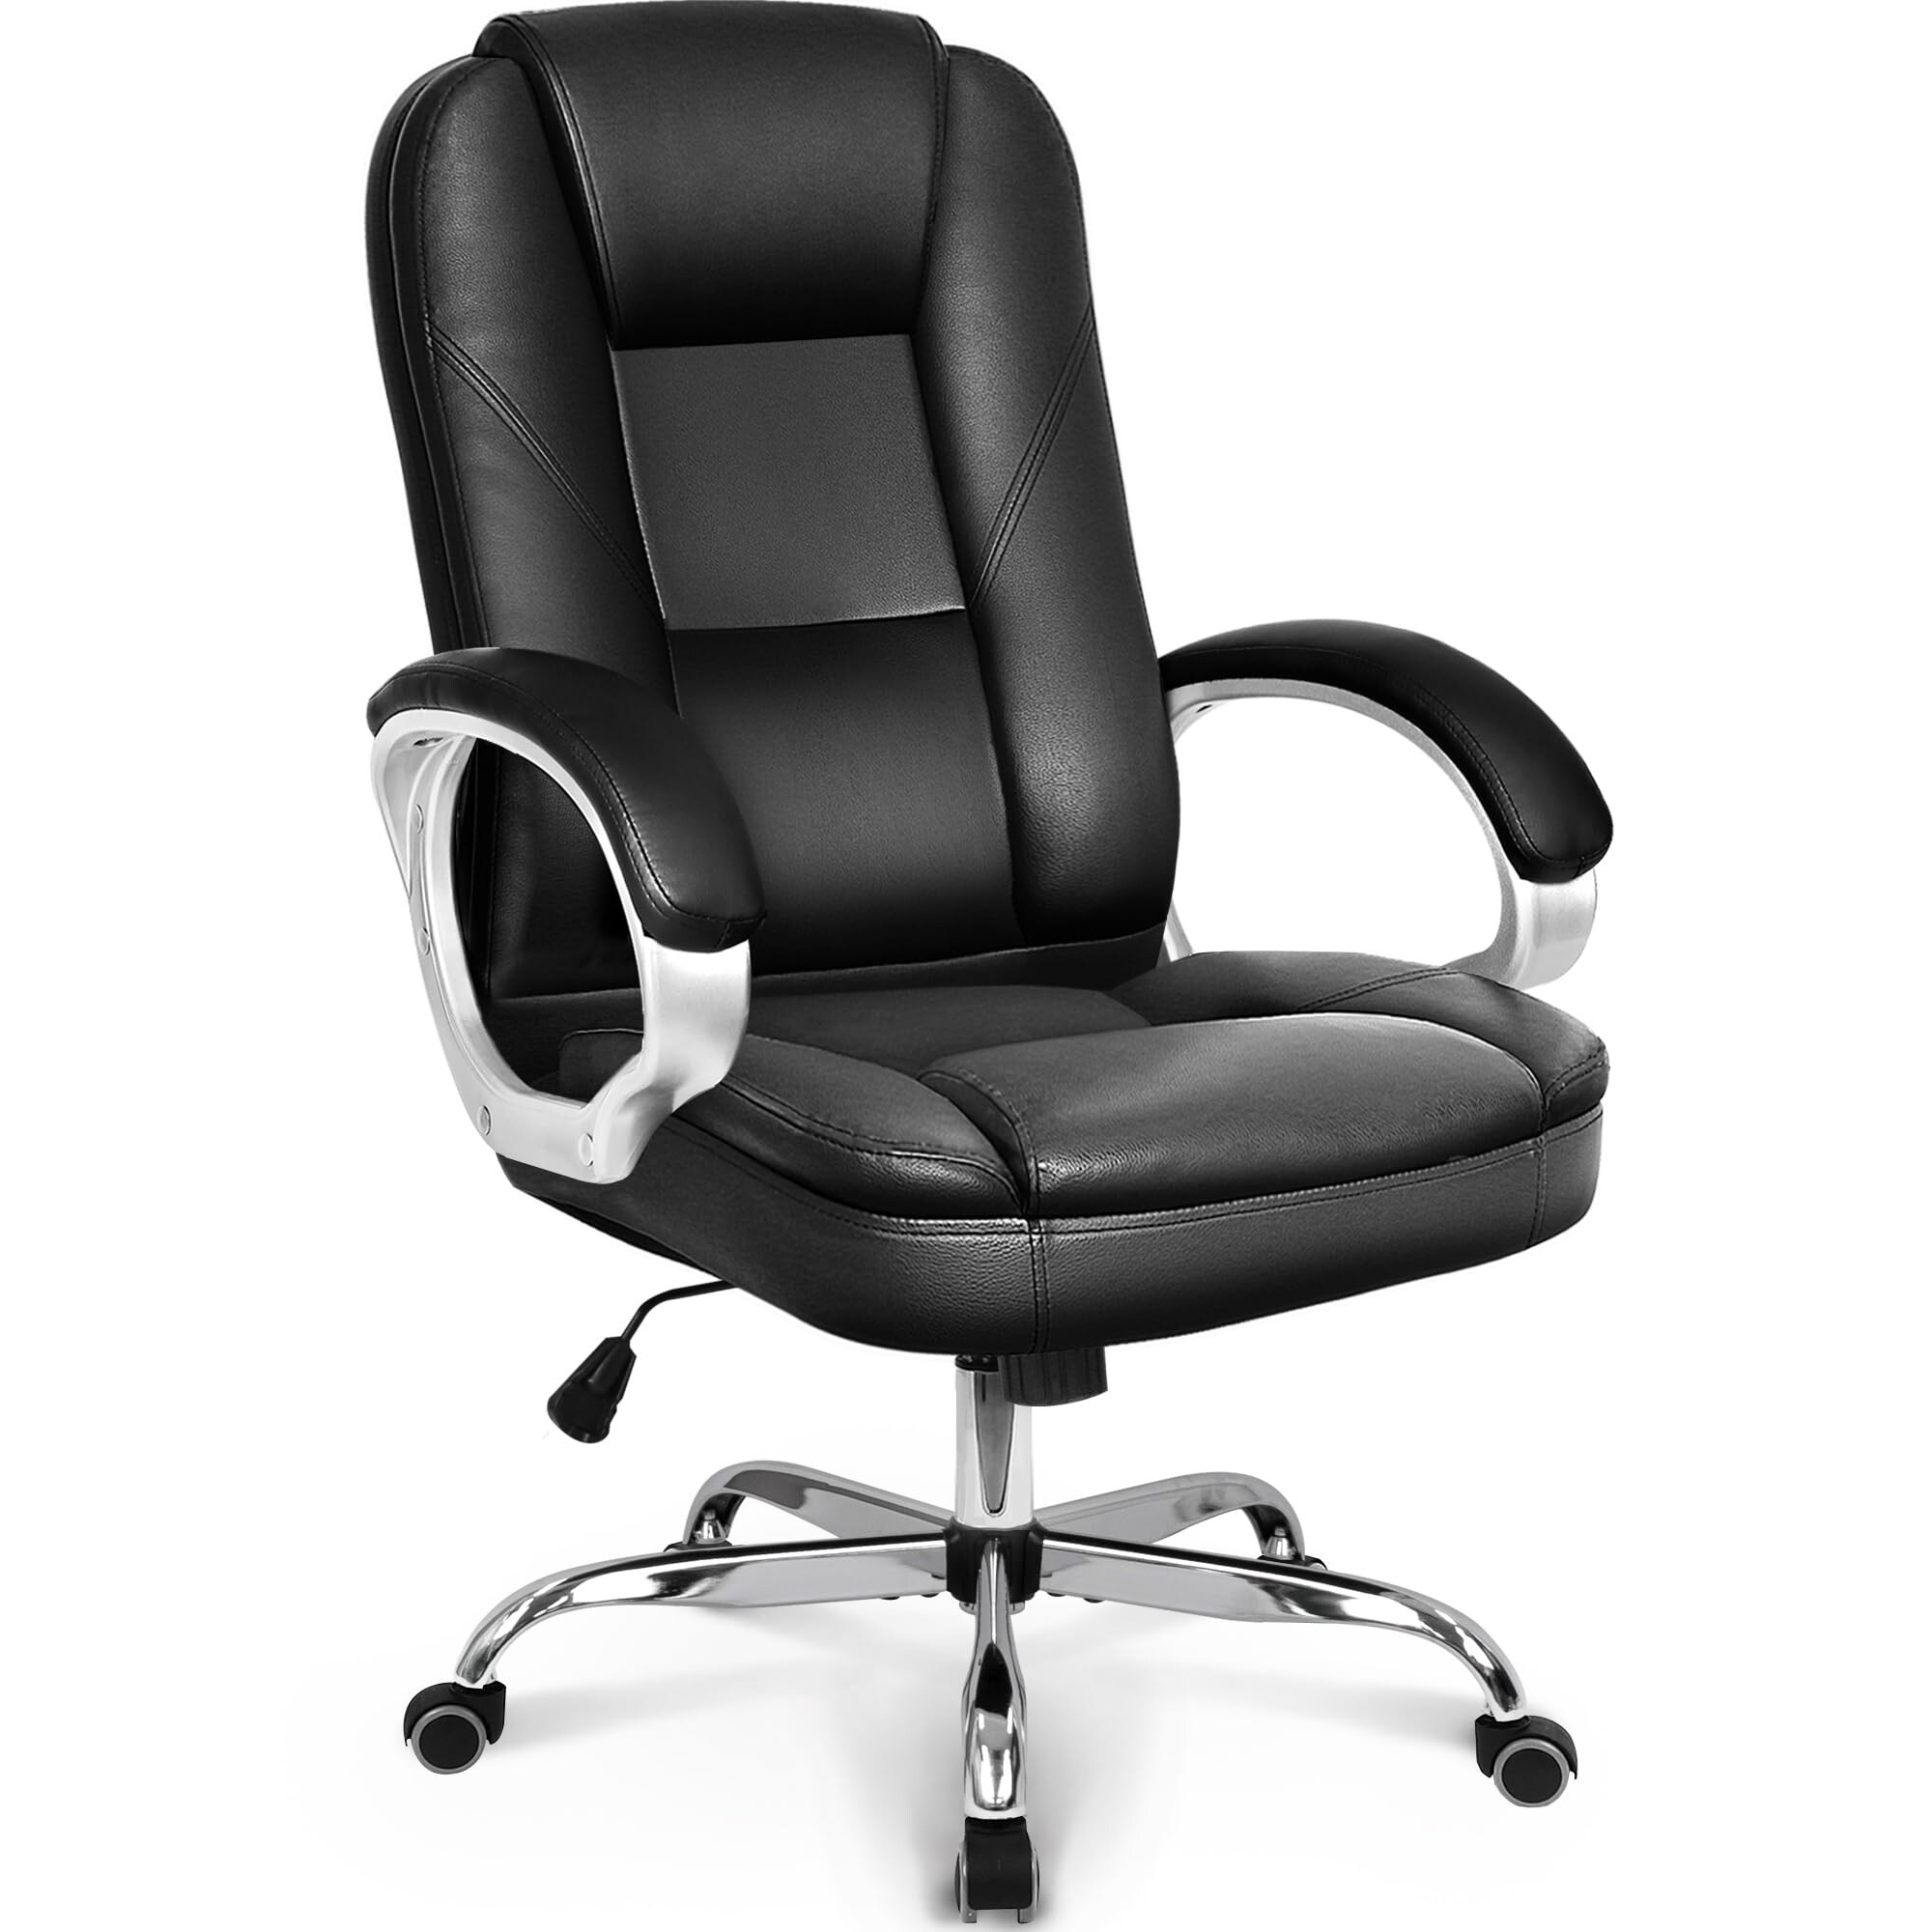 https://ak1.ostkcdn.com/images/products/is/images/direct/4feaeed910c840cc1c9712f867f7e5372d28b436/Office-Chair-Computer-Desk-Gaming-Ergonomic-High-Back-Cushion-Lumbar-Support-with-Wheels-Jet-Racing-Seat-Adjustable-Swivel.jpg